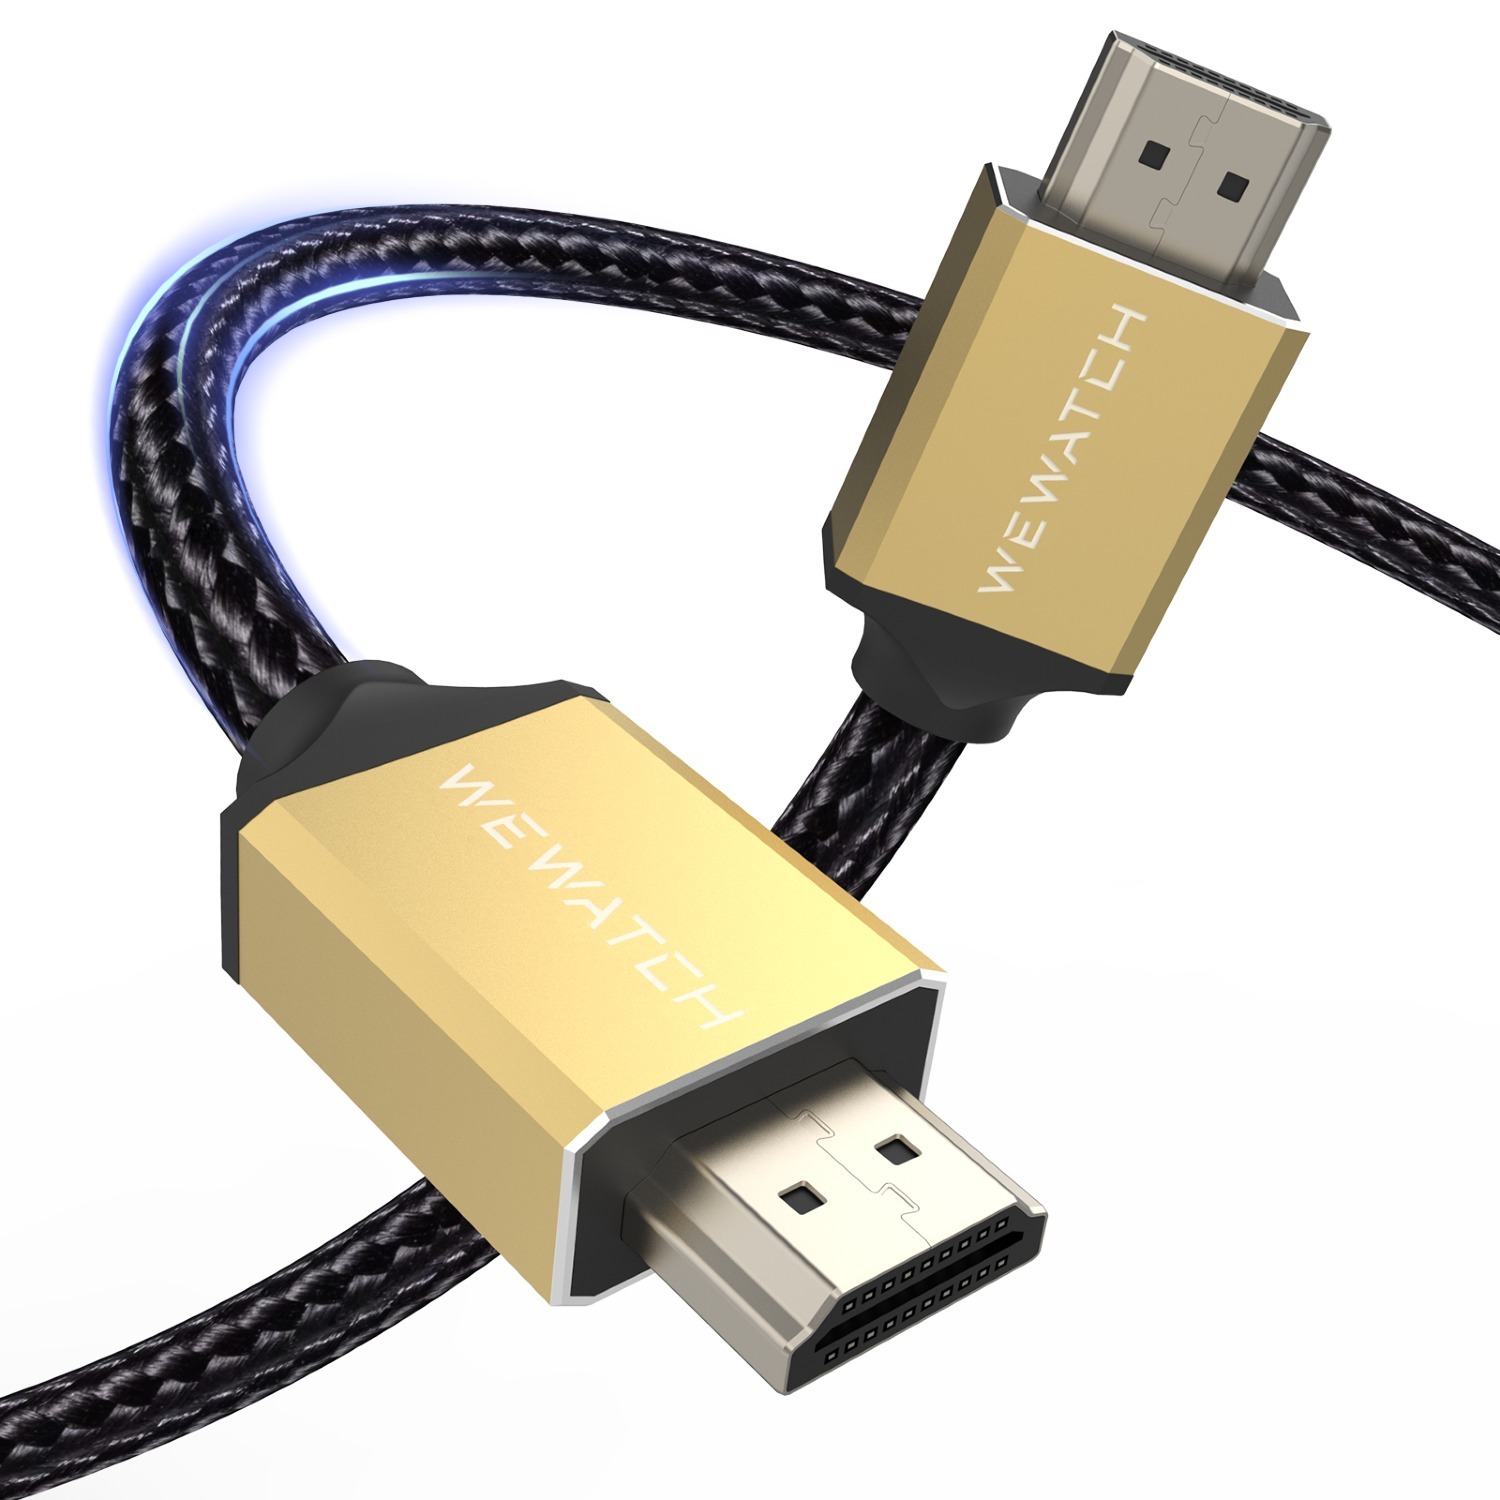 33' WEWATCH HDMI 2.0 Cable w/ 4K@60Hz & High Speed 18Gpbs $8 + Free Shipping